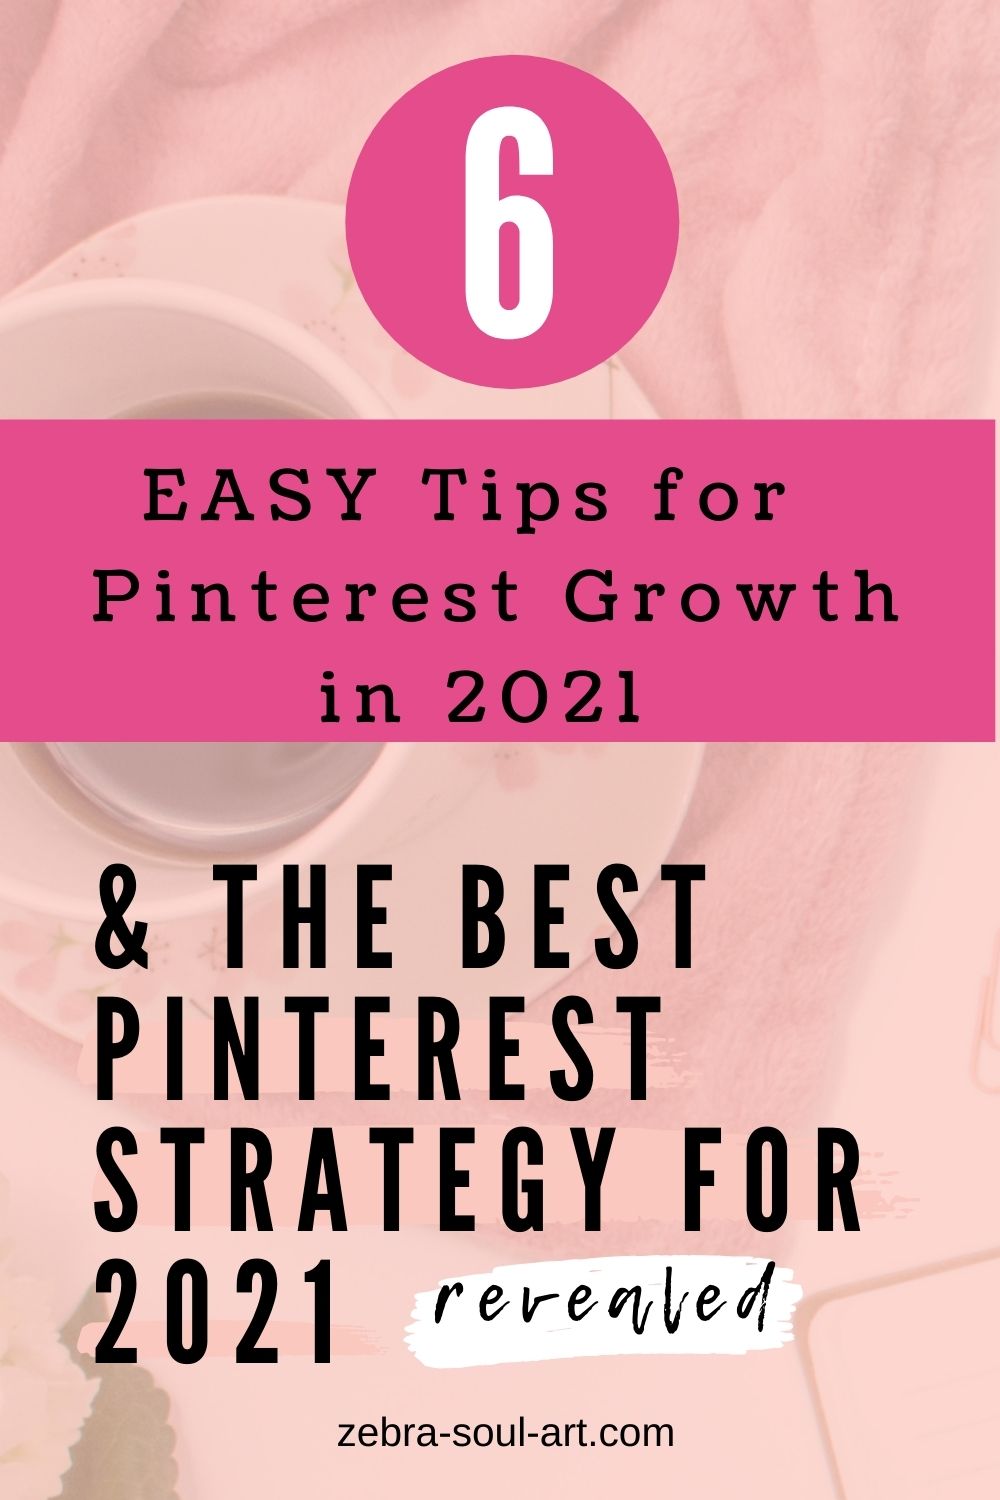 coffee on a table, pink colors. text saying easy tips for pinterest growth in 2021 and the best pinterest strategy for 2021, by zebra soul art